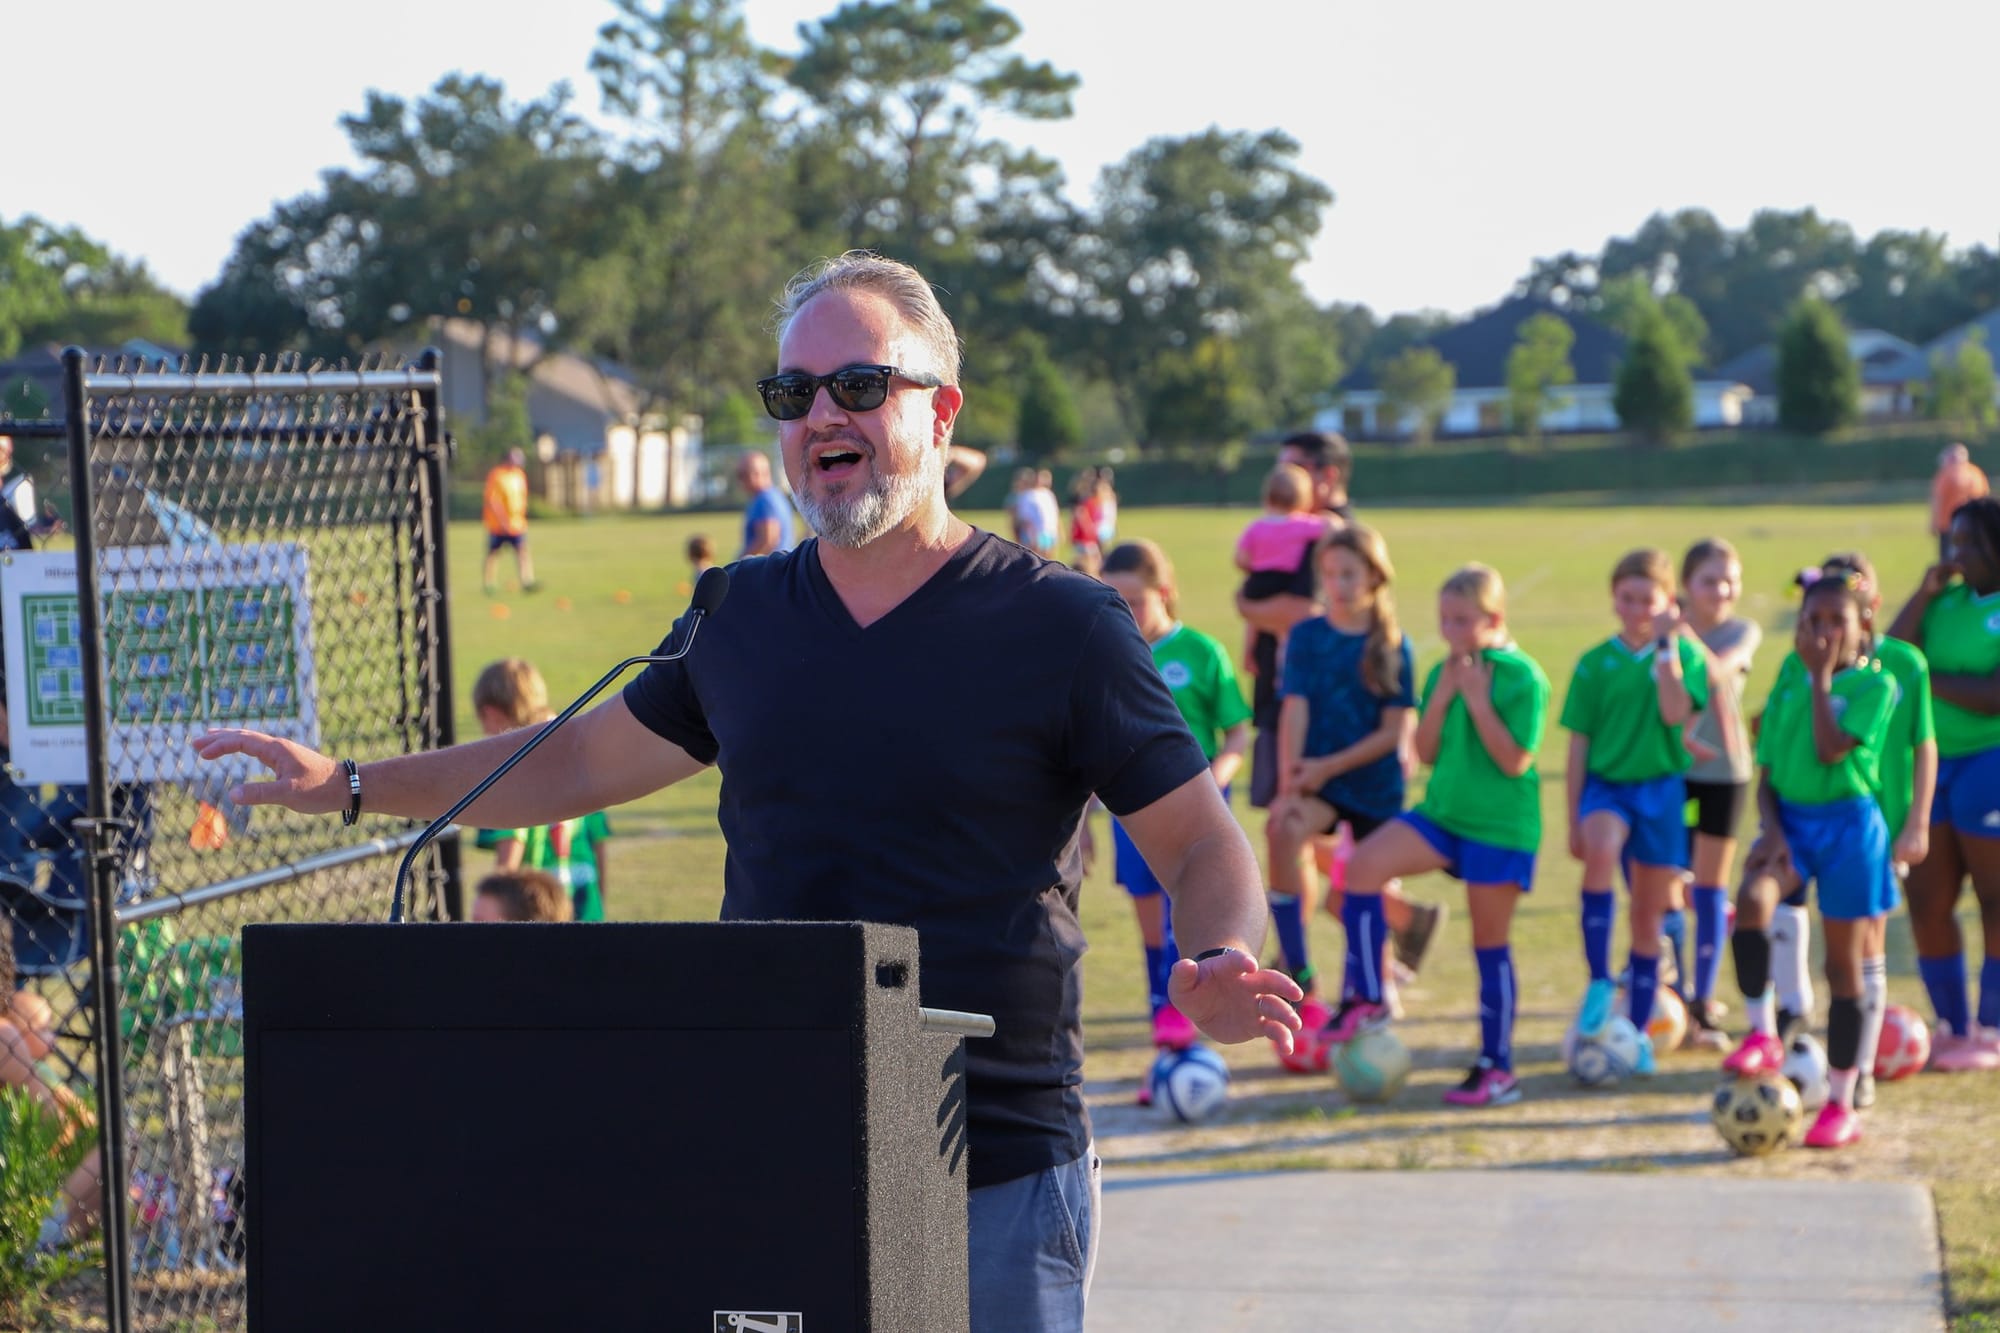 Phil Nickinson in a black T-shirt speaking in front of a group of children in soccer uniforms.